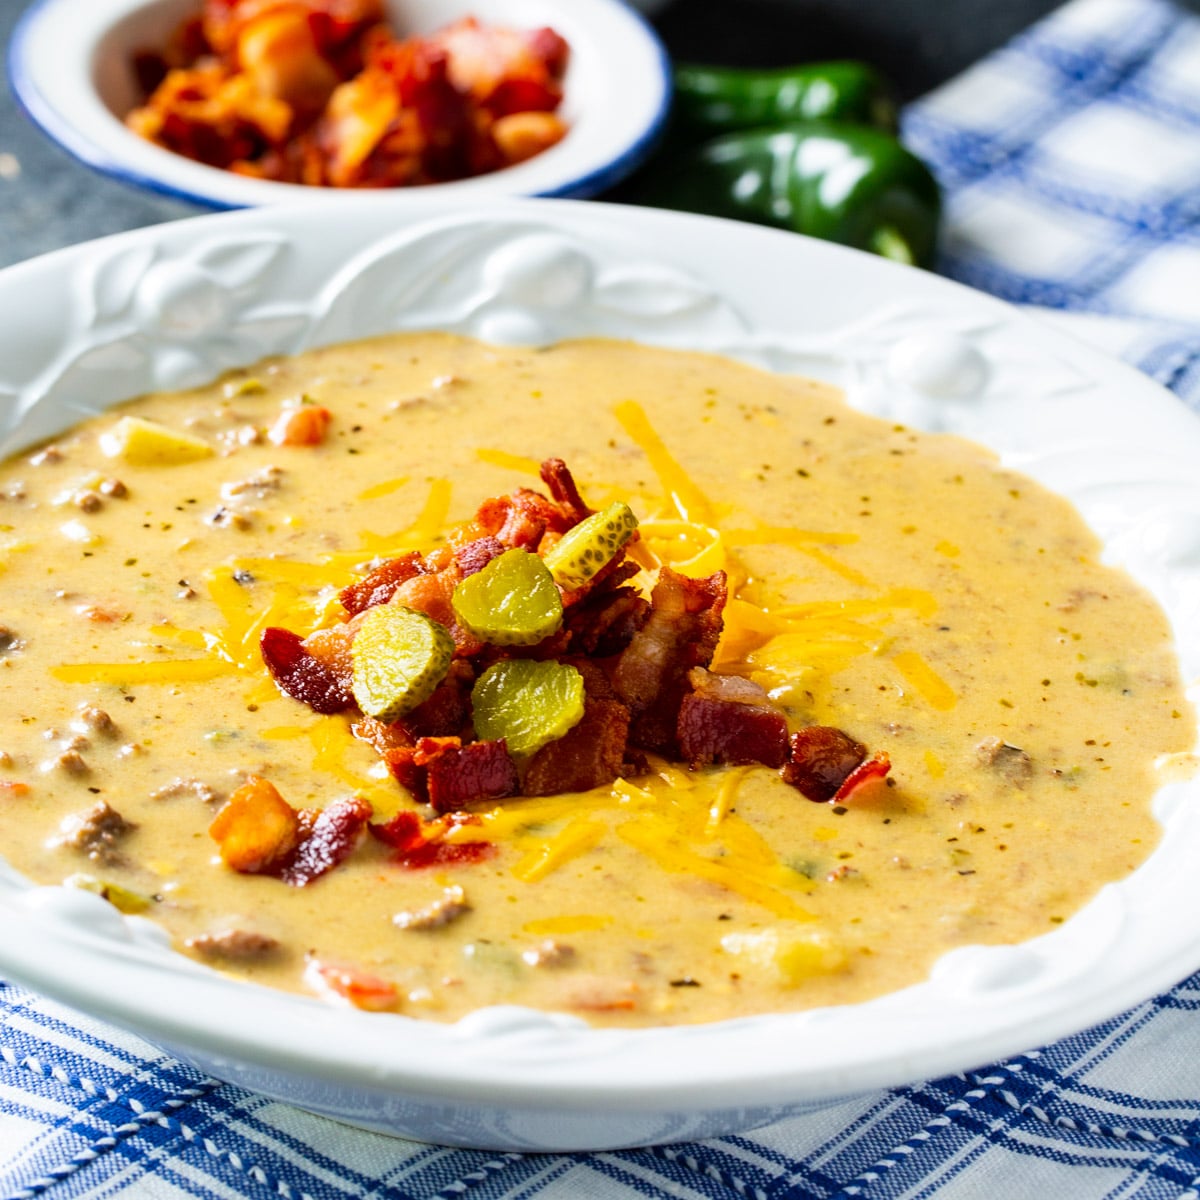 Jalapeno Bacon Cheeseburger Soup topped with crumbled bacon in a soup bowl.